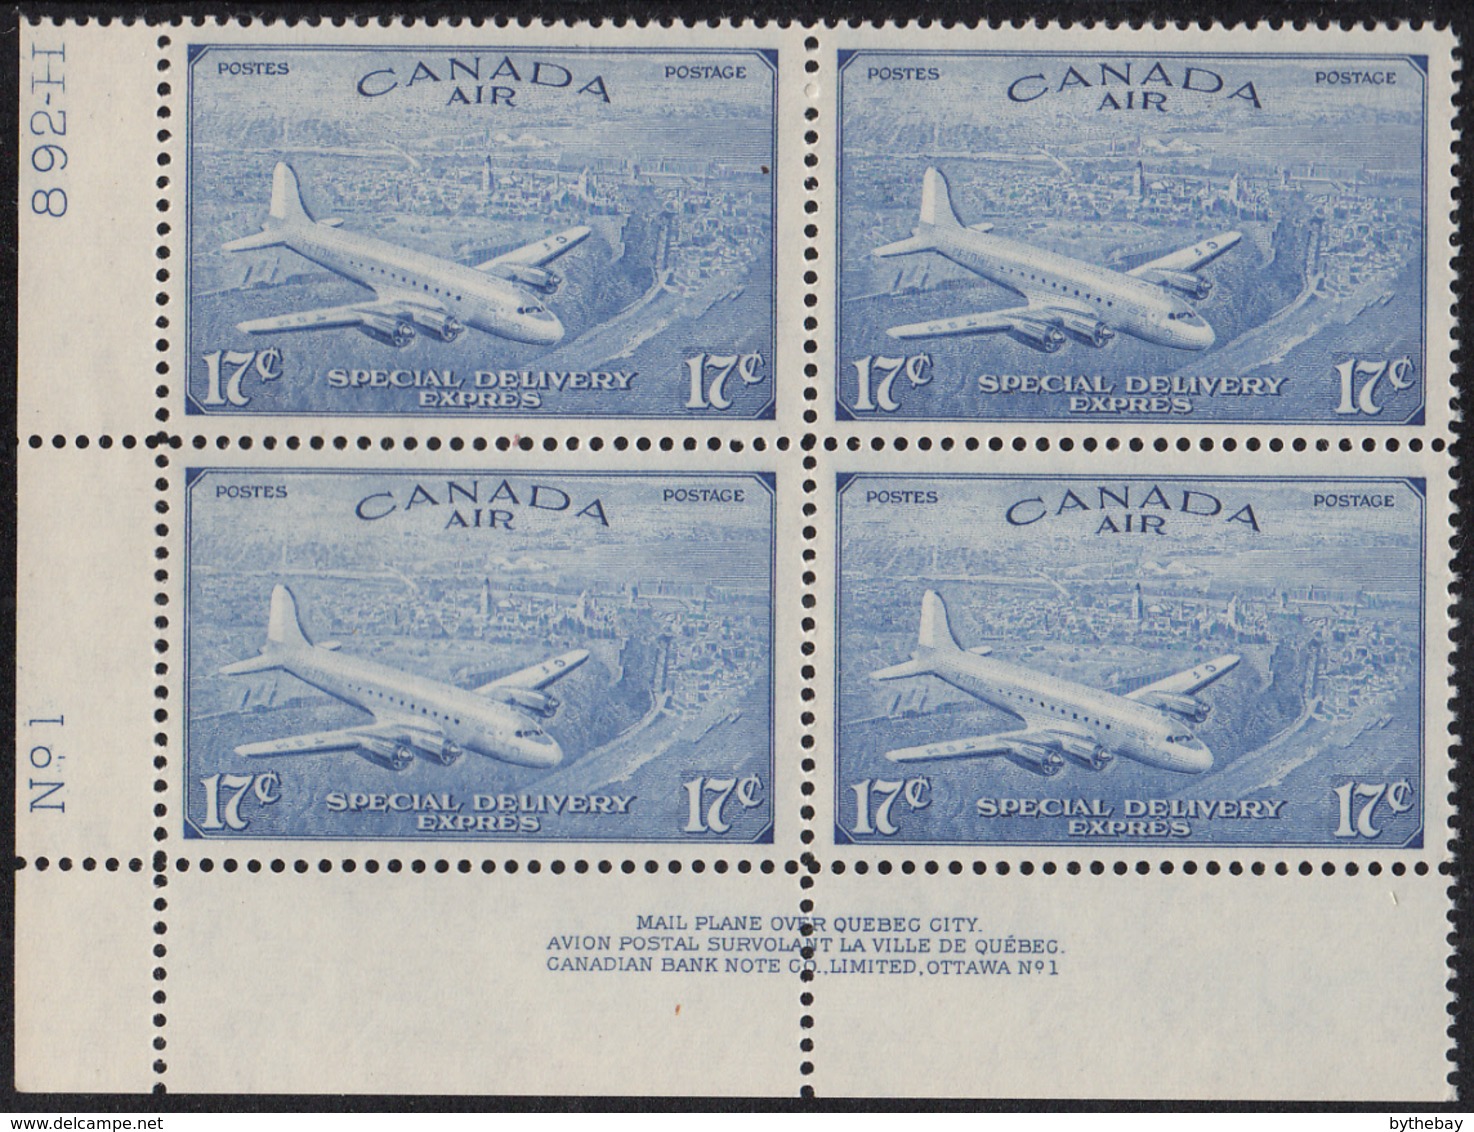 Canada 1946 MNH Sc CE3 17c D.C. 4-M Airplane Plate 1 Lower Left Plate Block - Sellos Aéreos Semi-oficiales